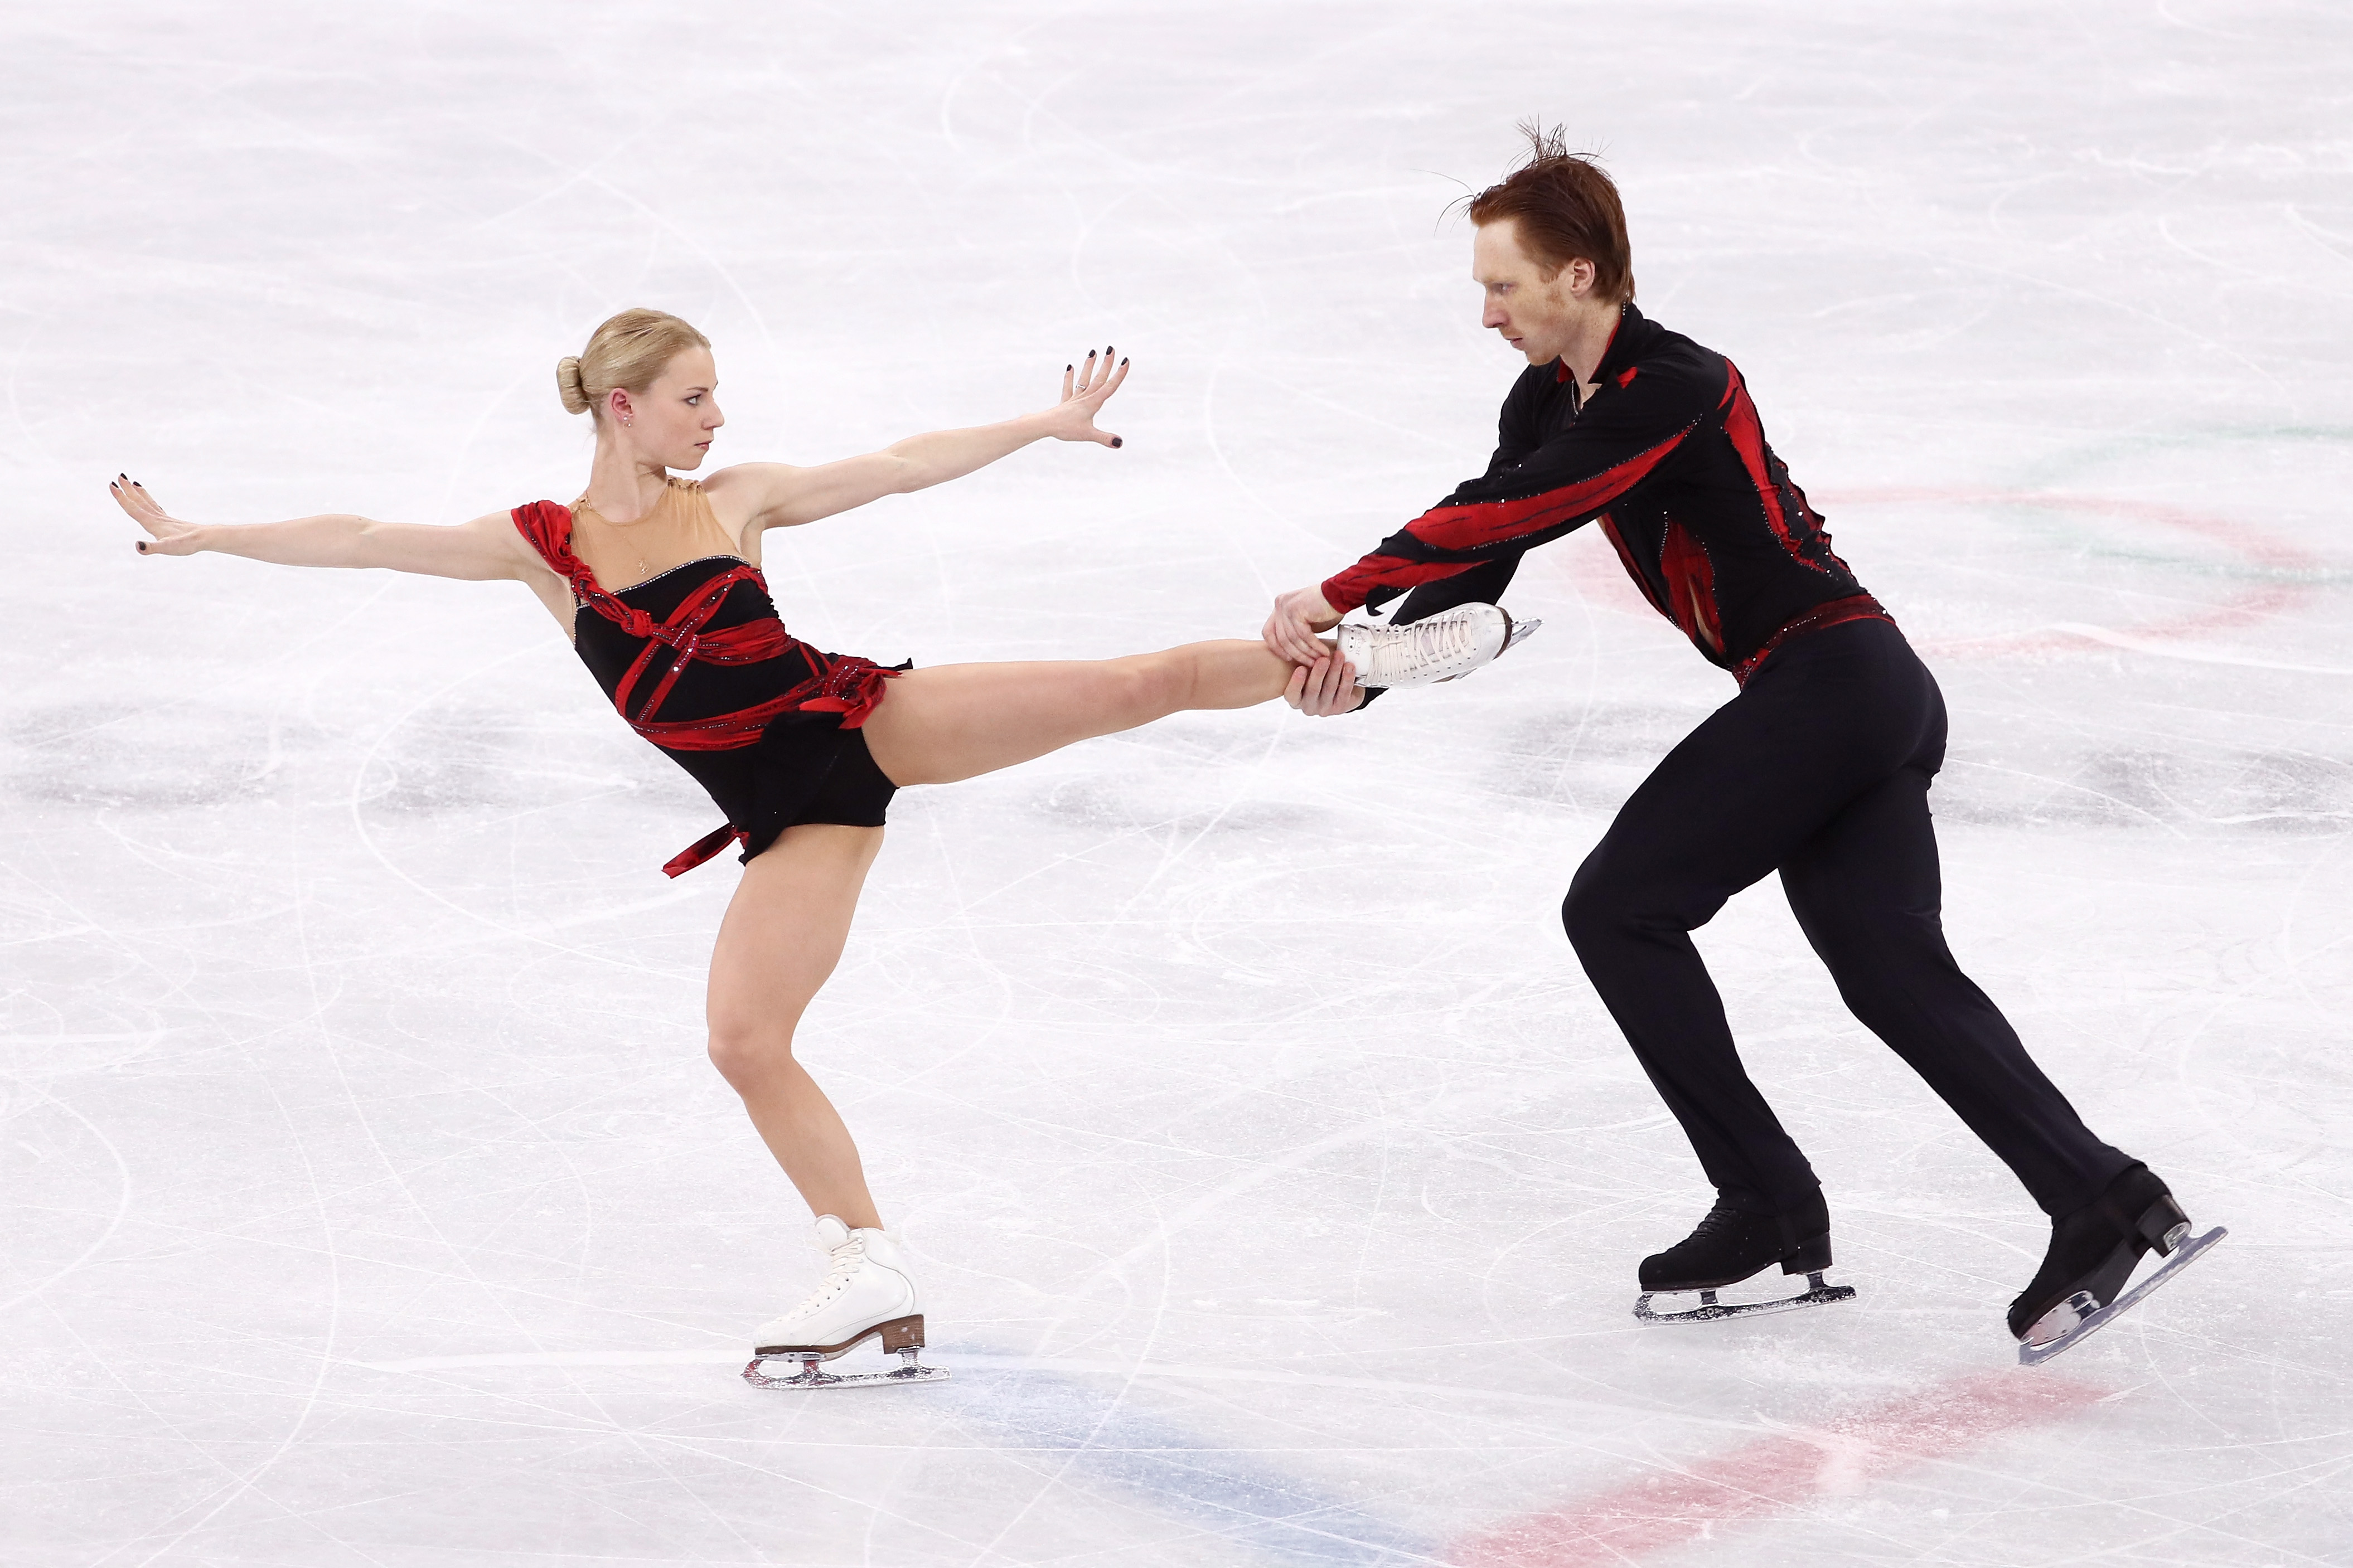 Olympic Athletes from Russia Evgenia Tarasova and Vladimir Morozov compete during the Pair Skating Short Program on day five of the PyeongChang 2018 Winter Olympics on Feb. 14, 2018. (Jamie Squire—Getty Images)